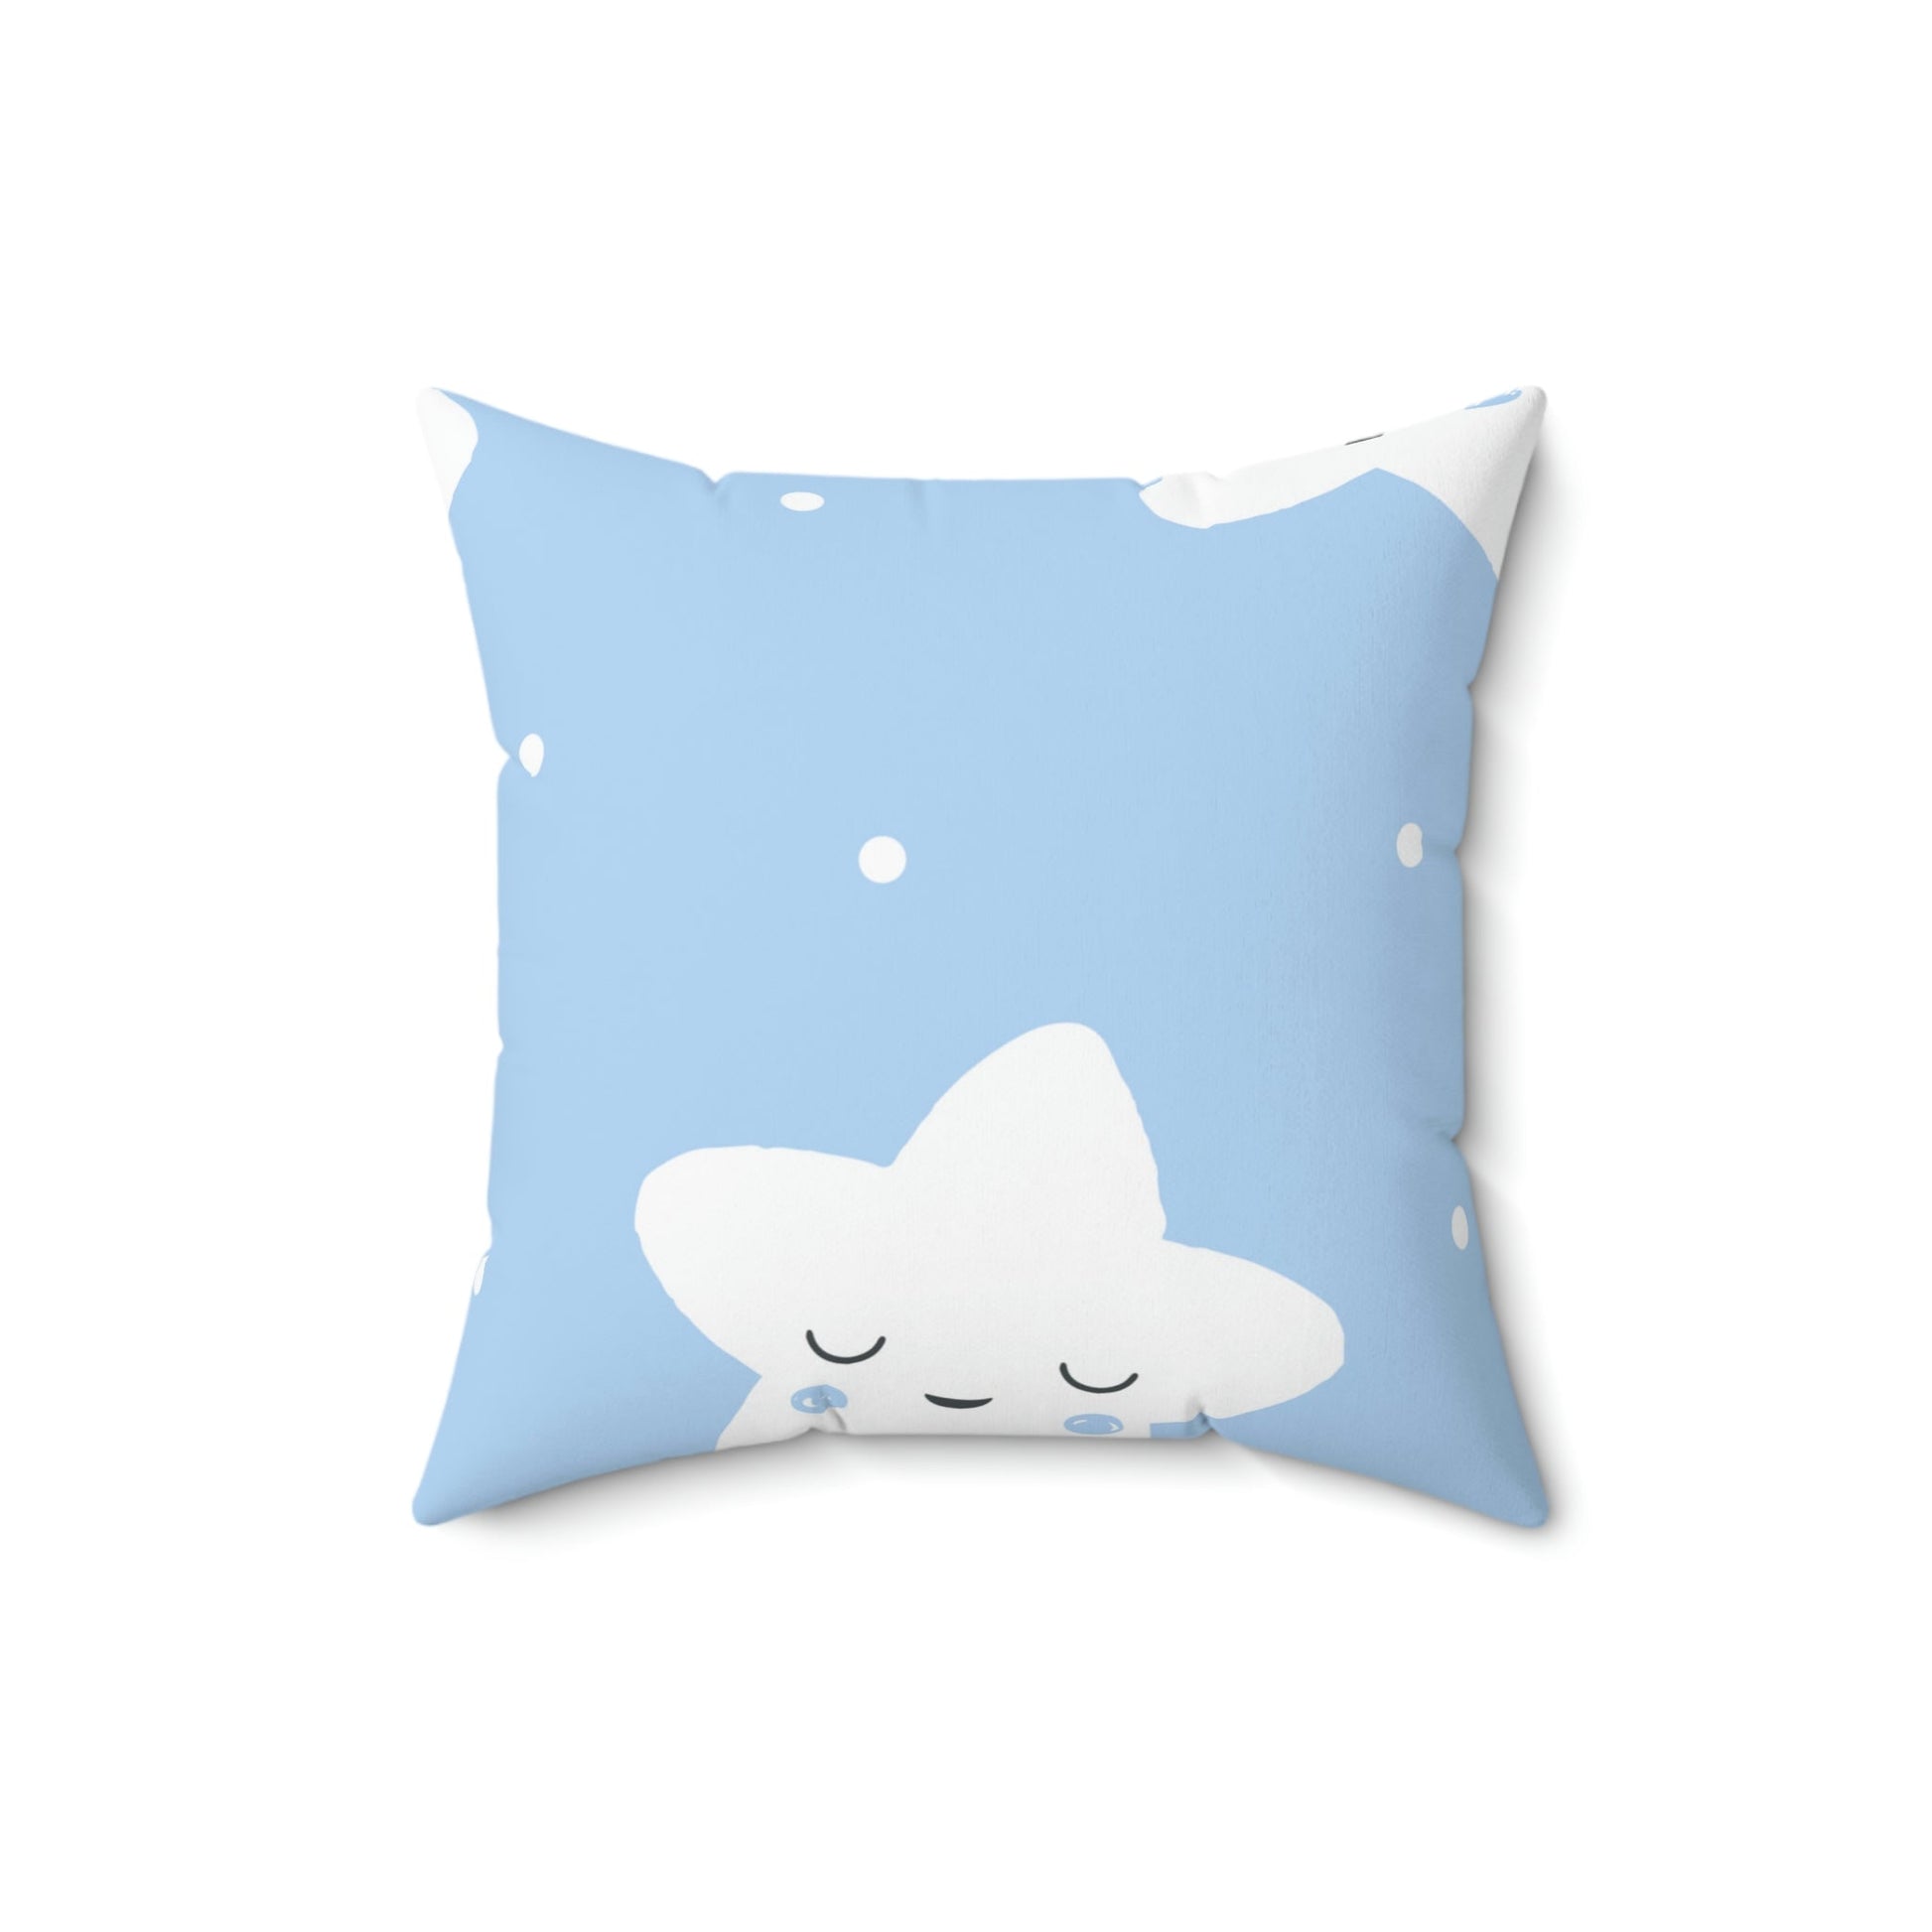 Sleepy Baby Star Blue Square Pillow Home Decor Pink Sweetheart